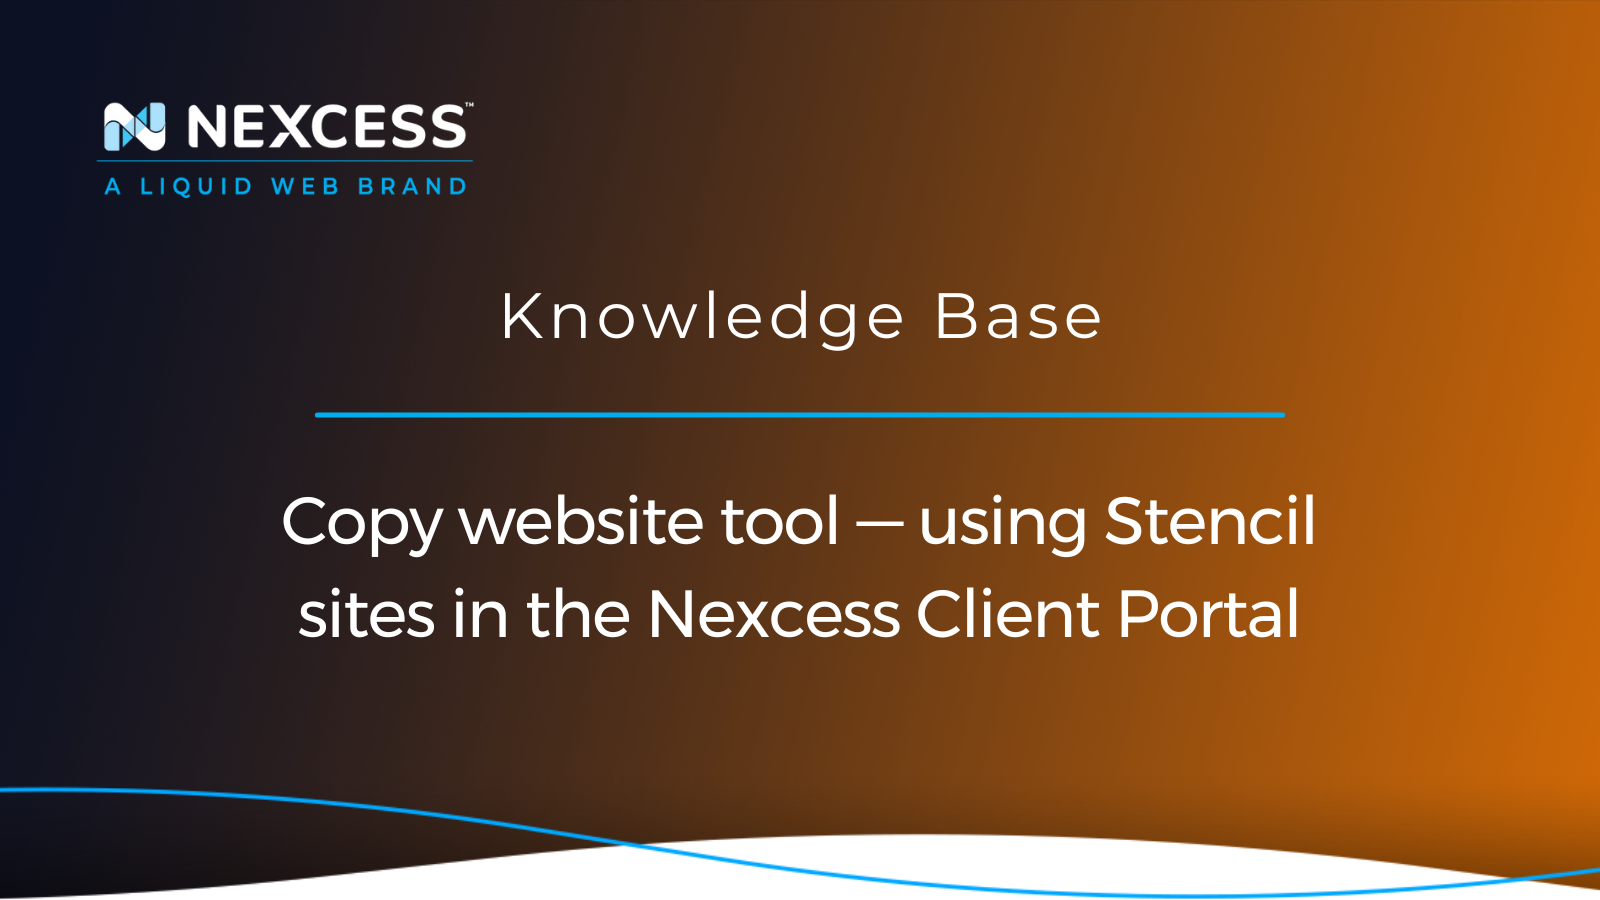 Copy website tool — using Stencil sites in the Nexcess Client Portal